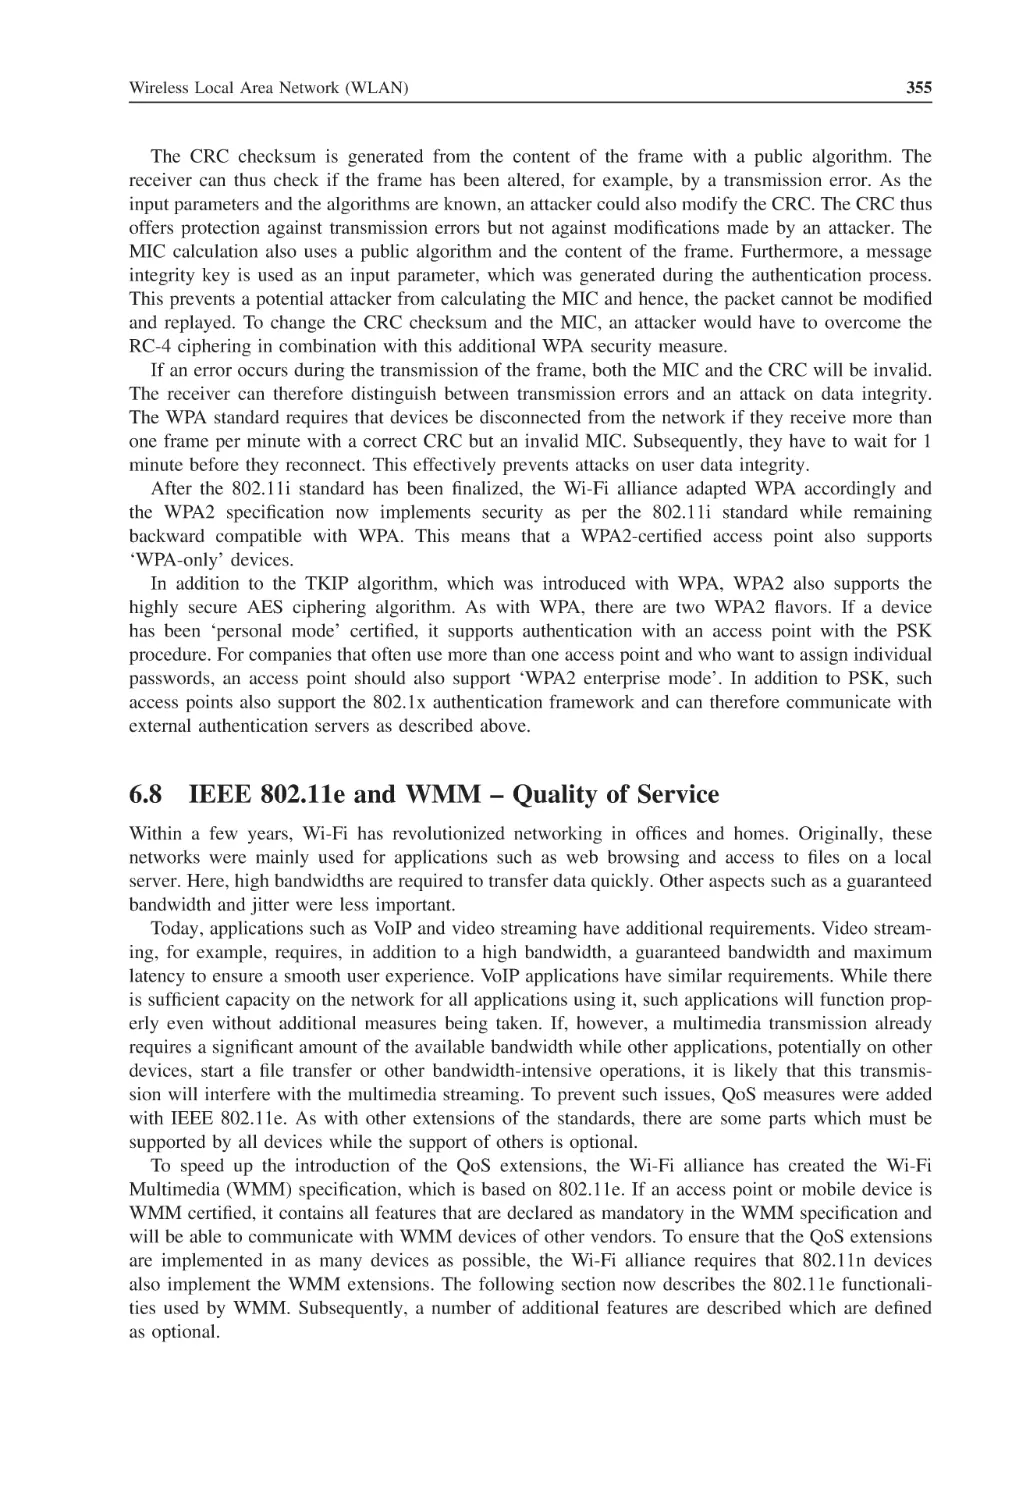 6.8 IEEE 802.11e and WMM – Quality of Service